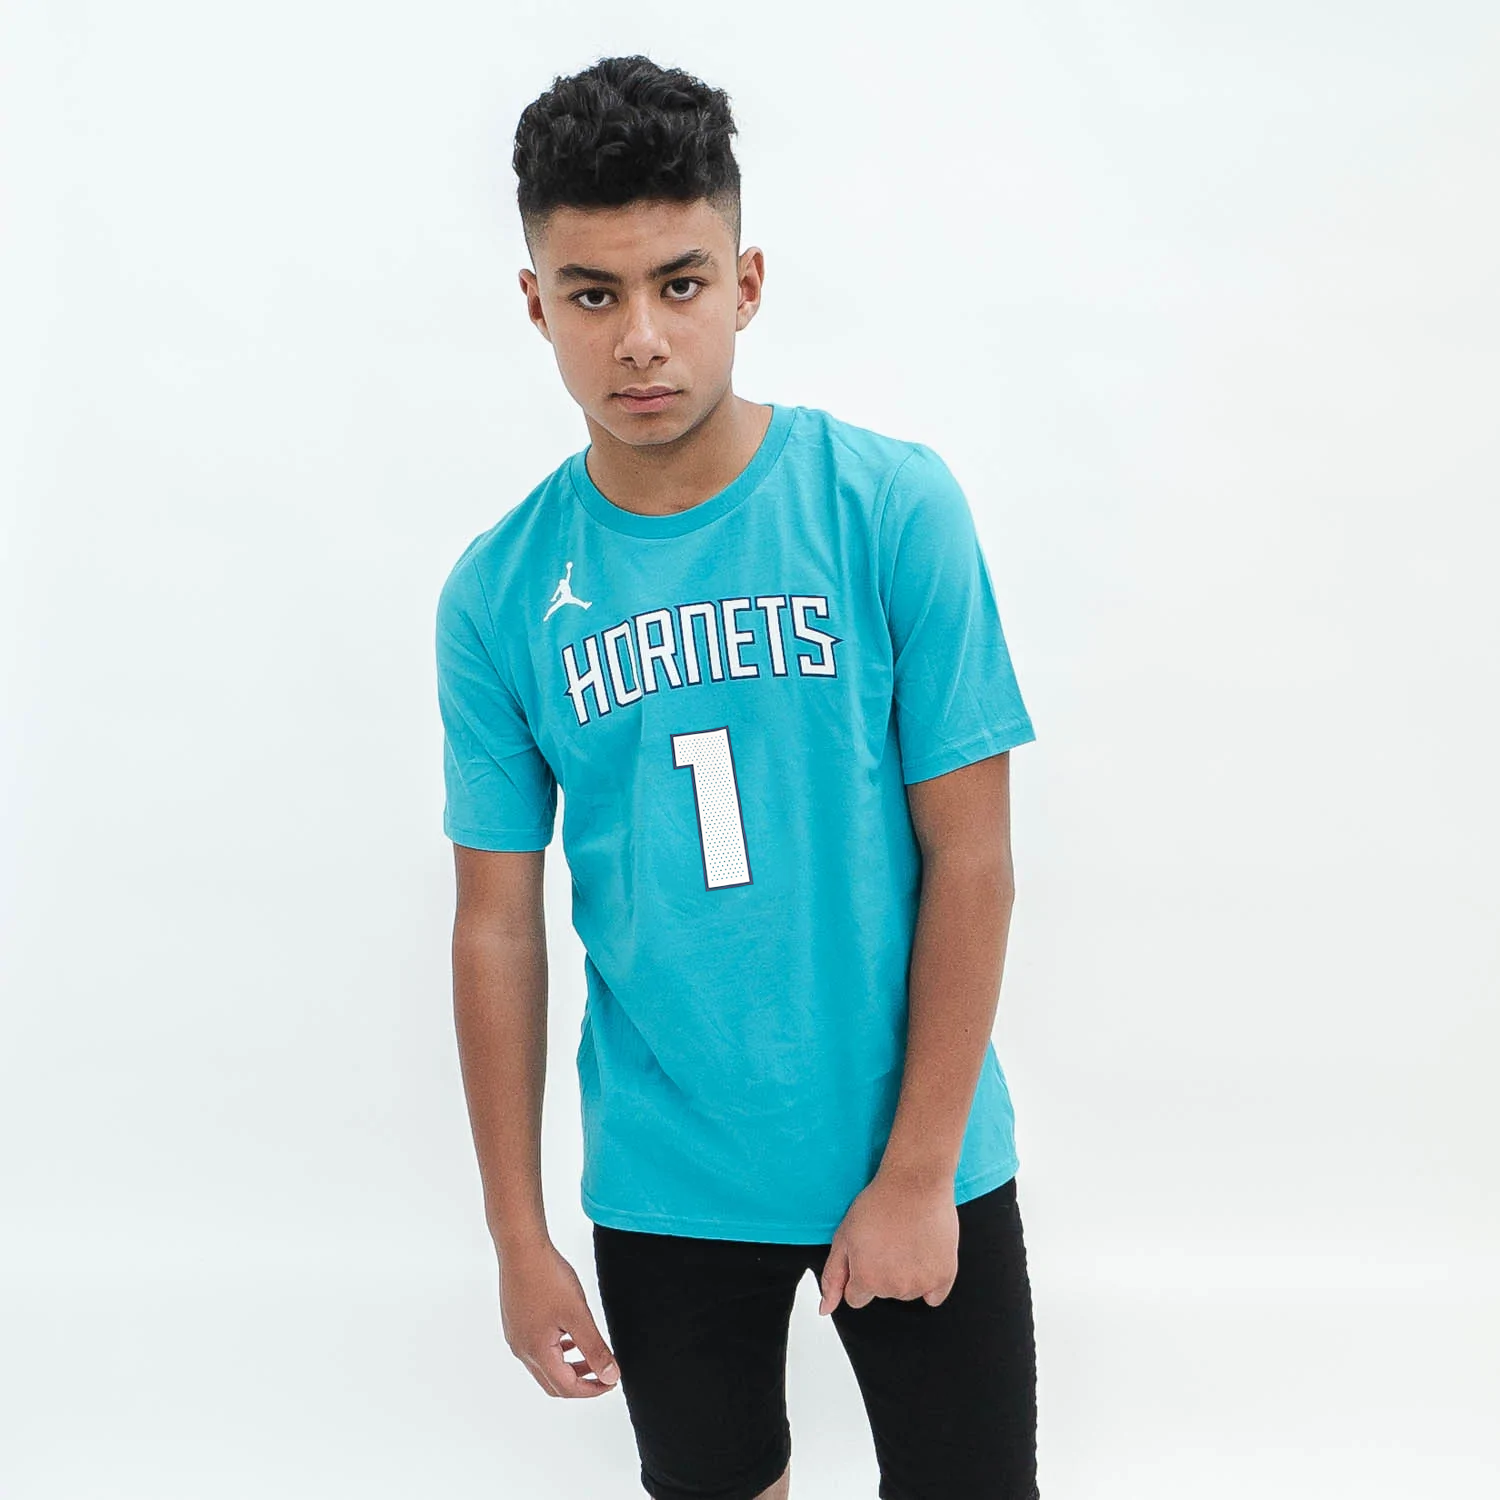 Men's Jordan Brand LaMelo Ball Teal Charlotte Hornets Authentic Player Jersey - Icon Edition